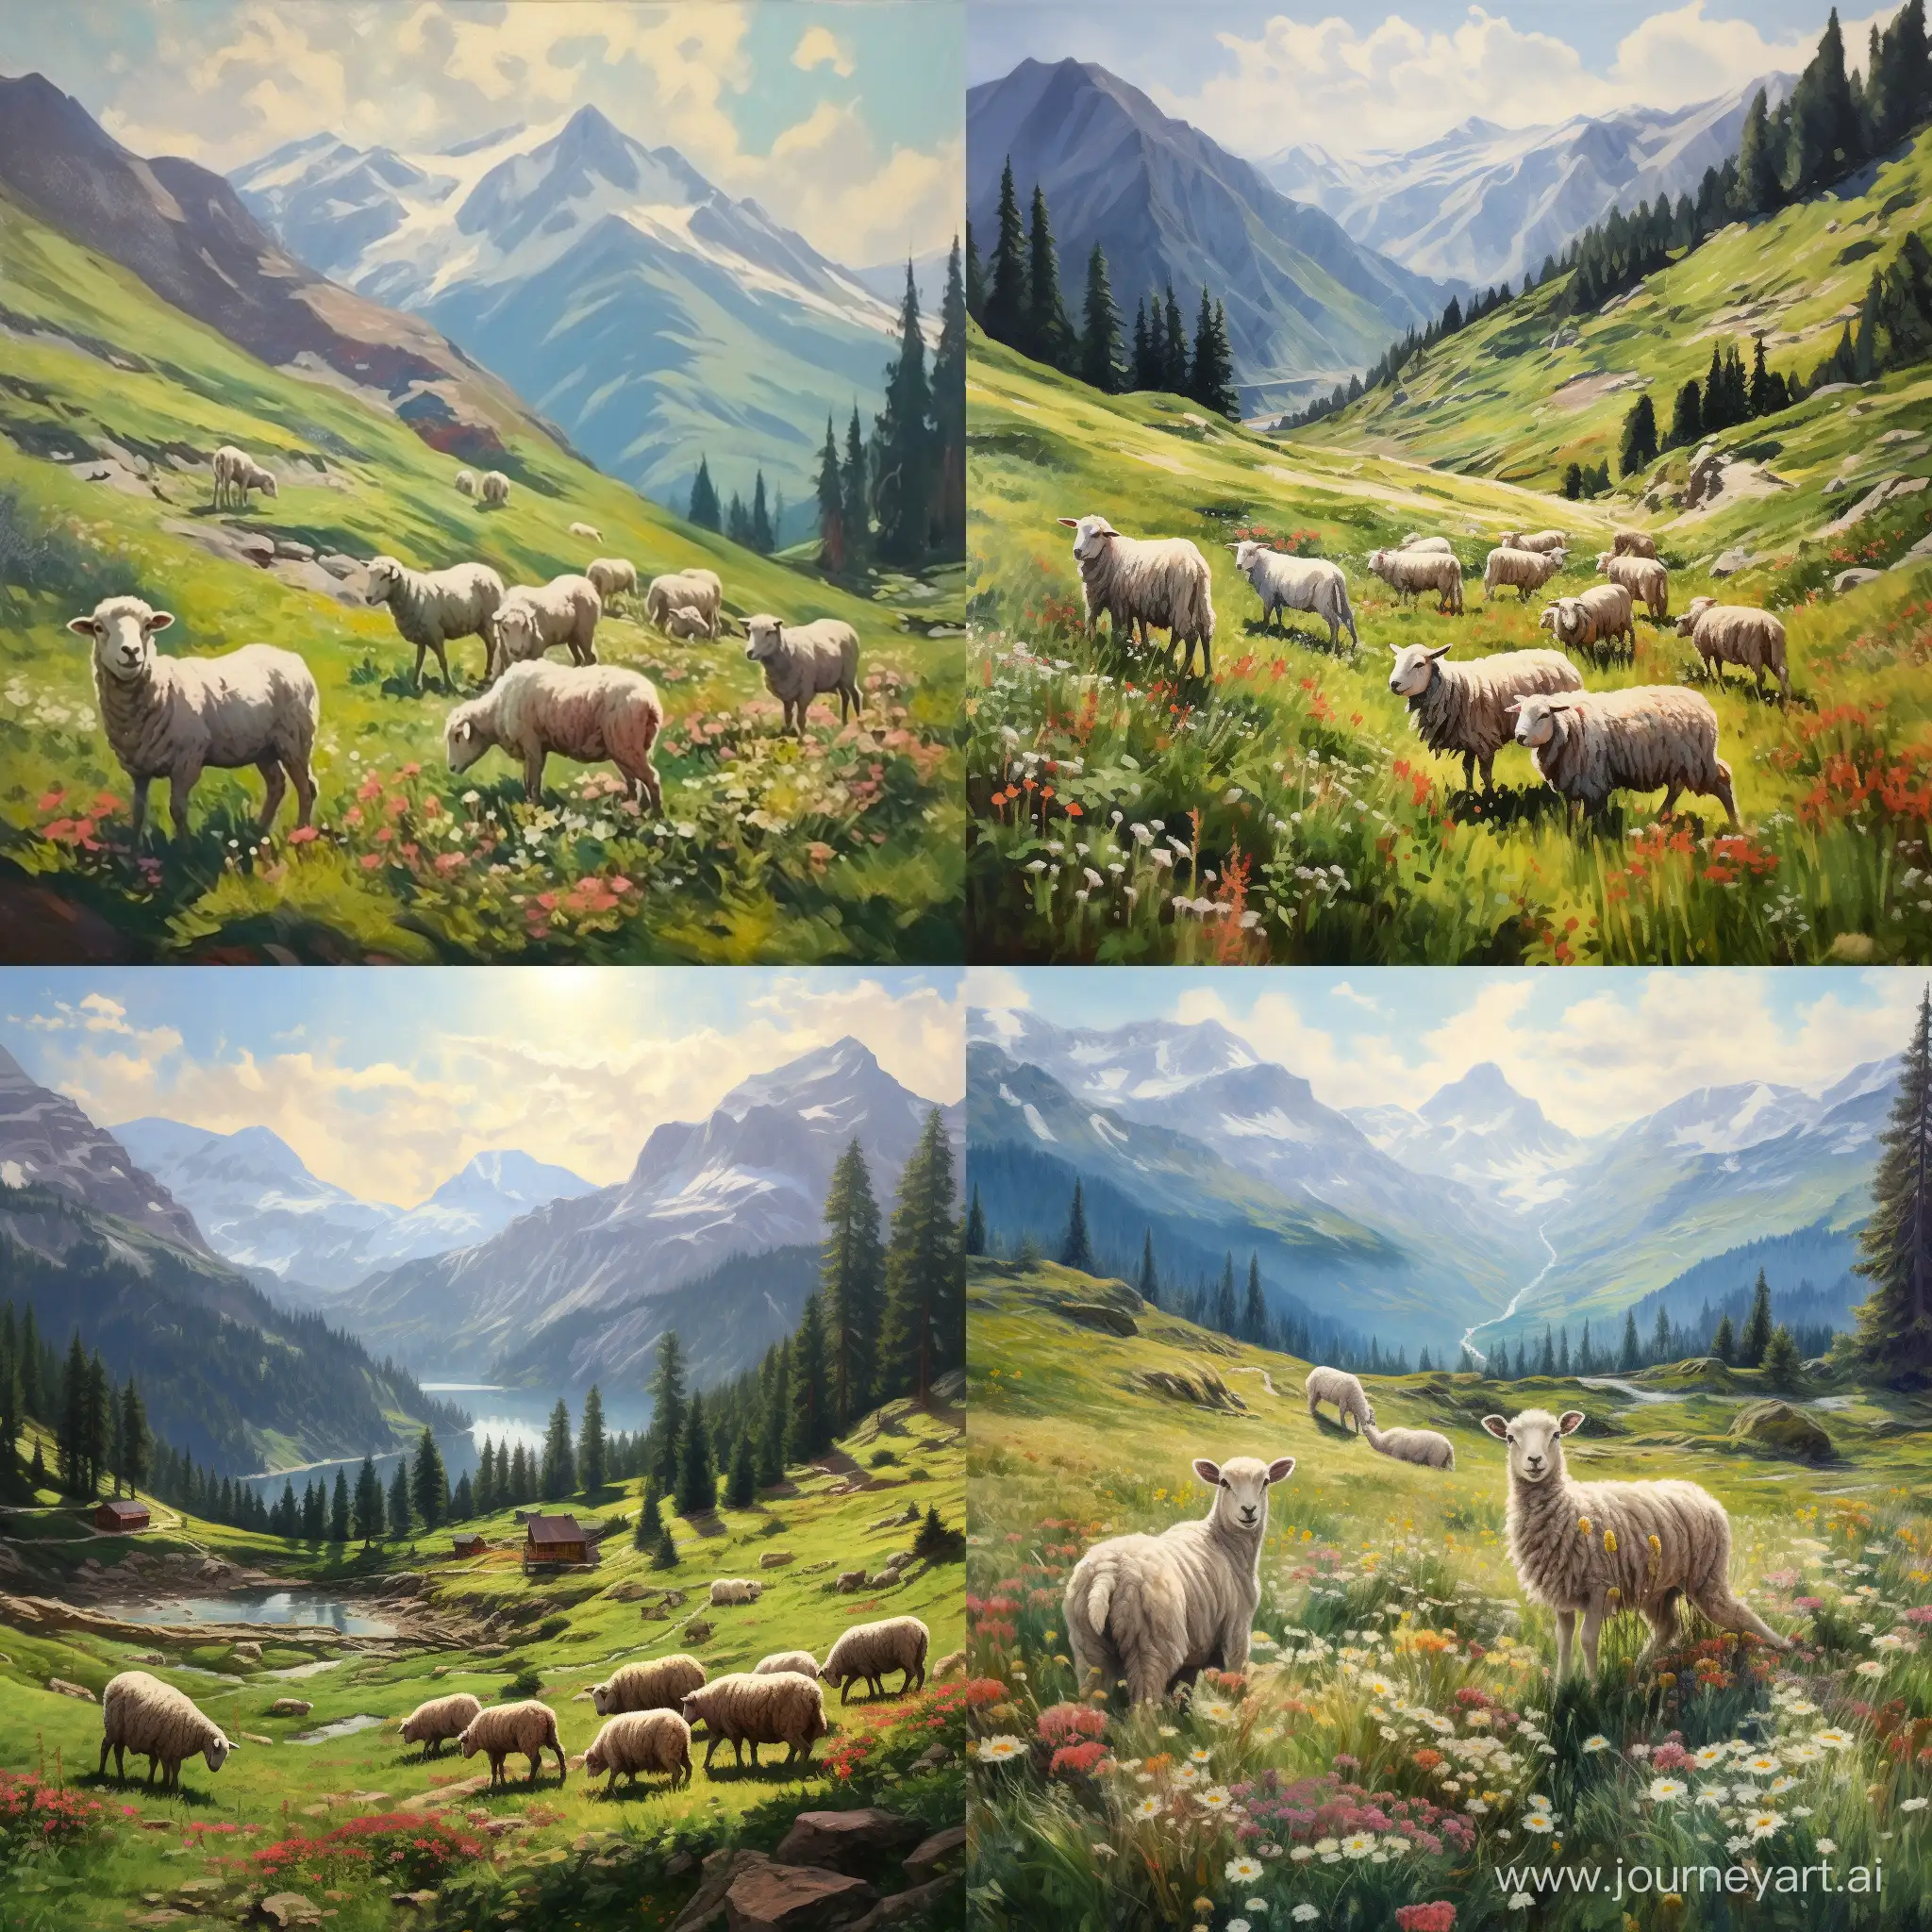 Scenic-Alpine-Meadows-Playful-Lambs-in-Caps-Frolicking